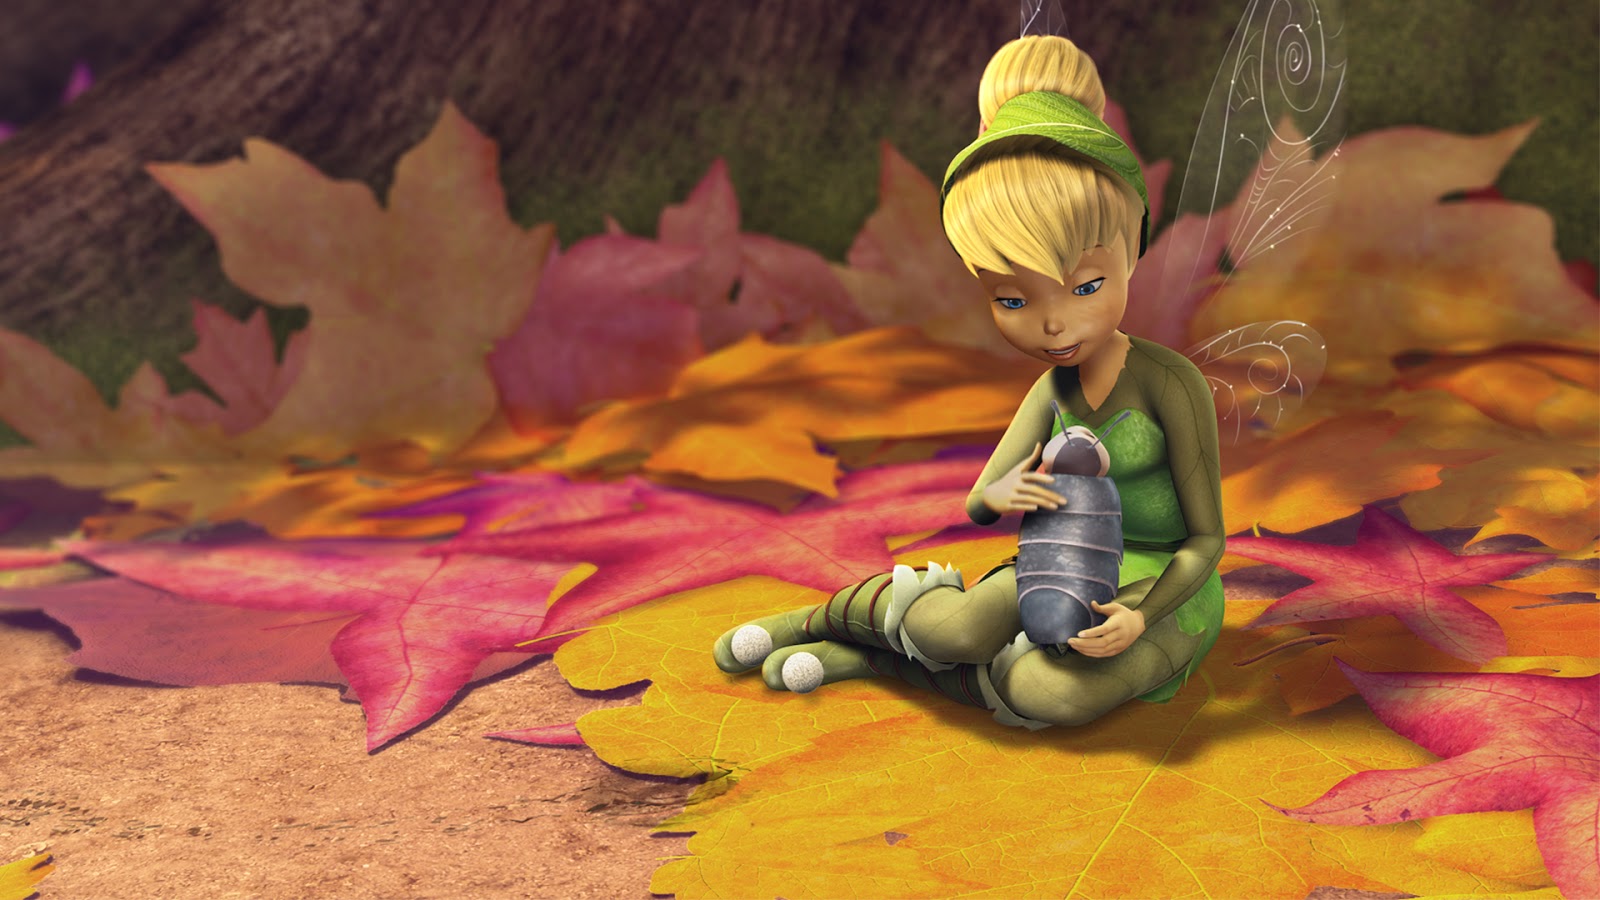 Tinkerbell and the lost treasure full movie